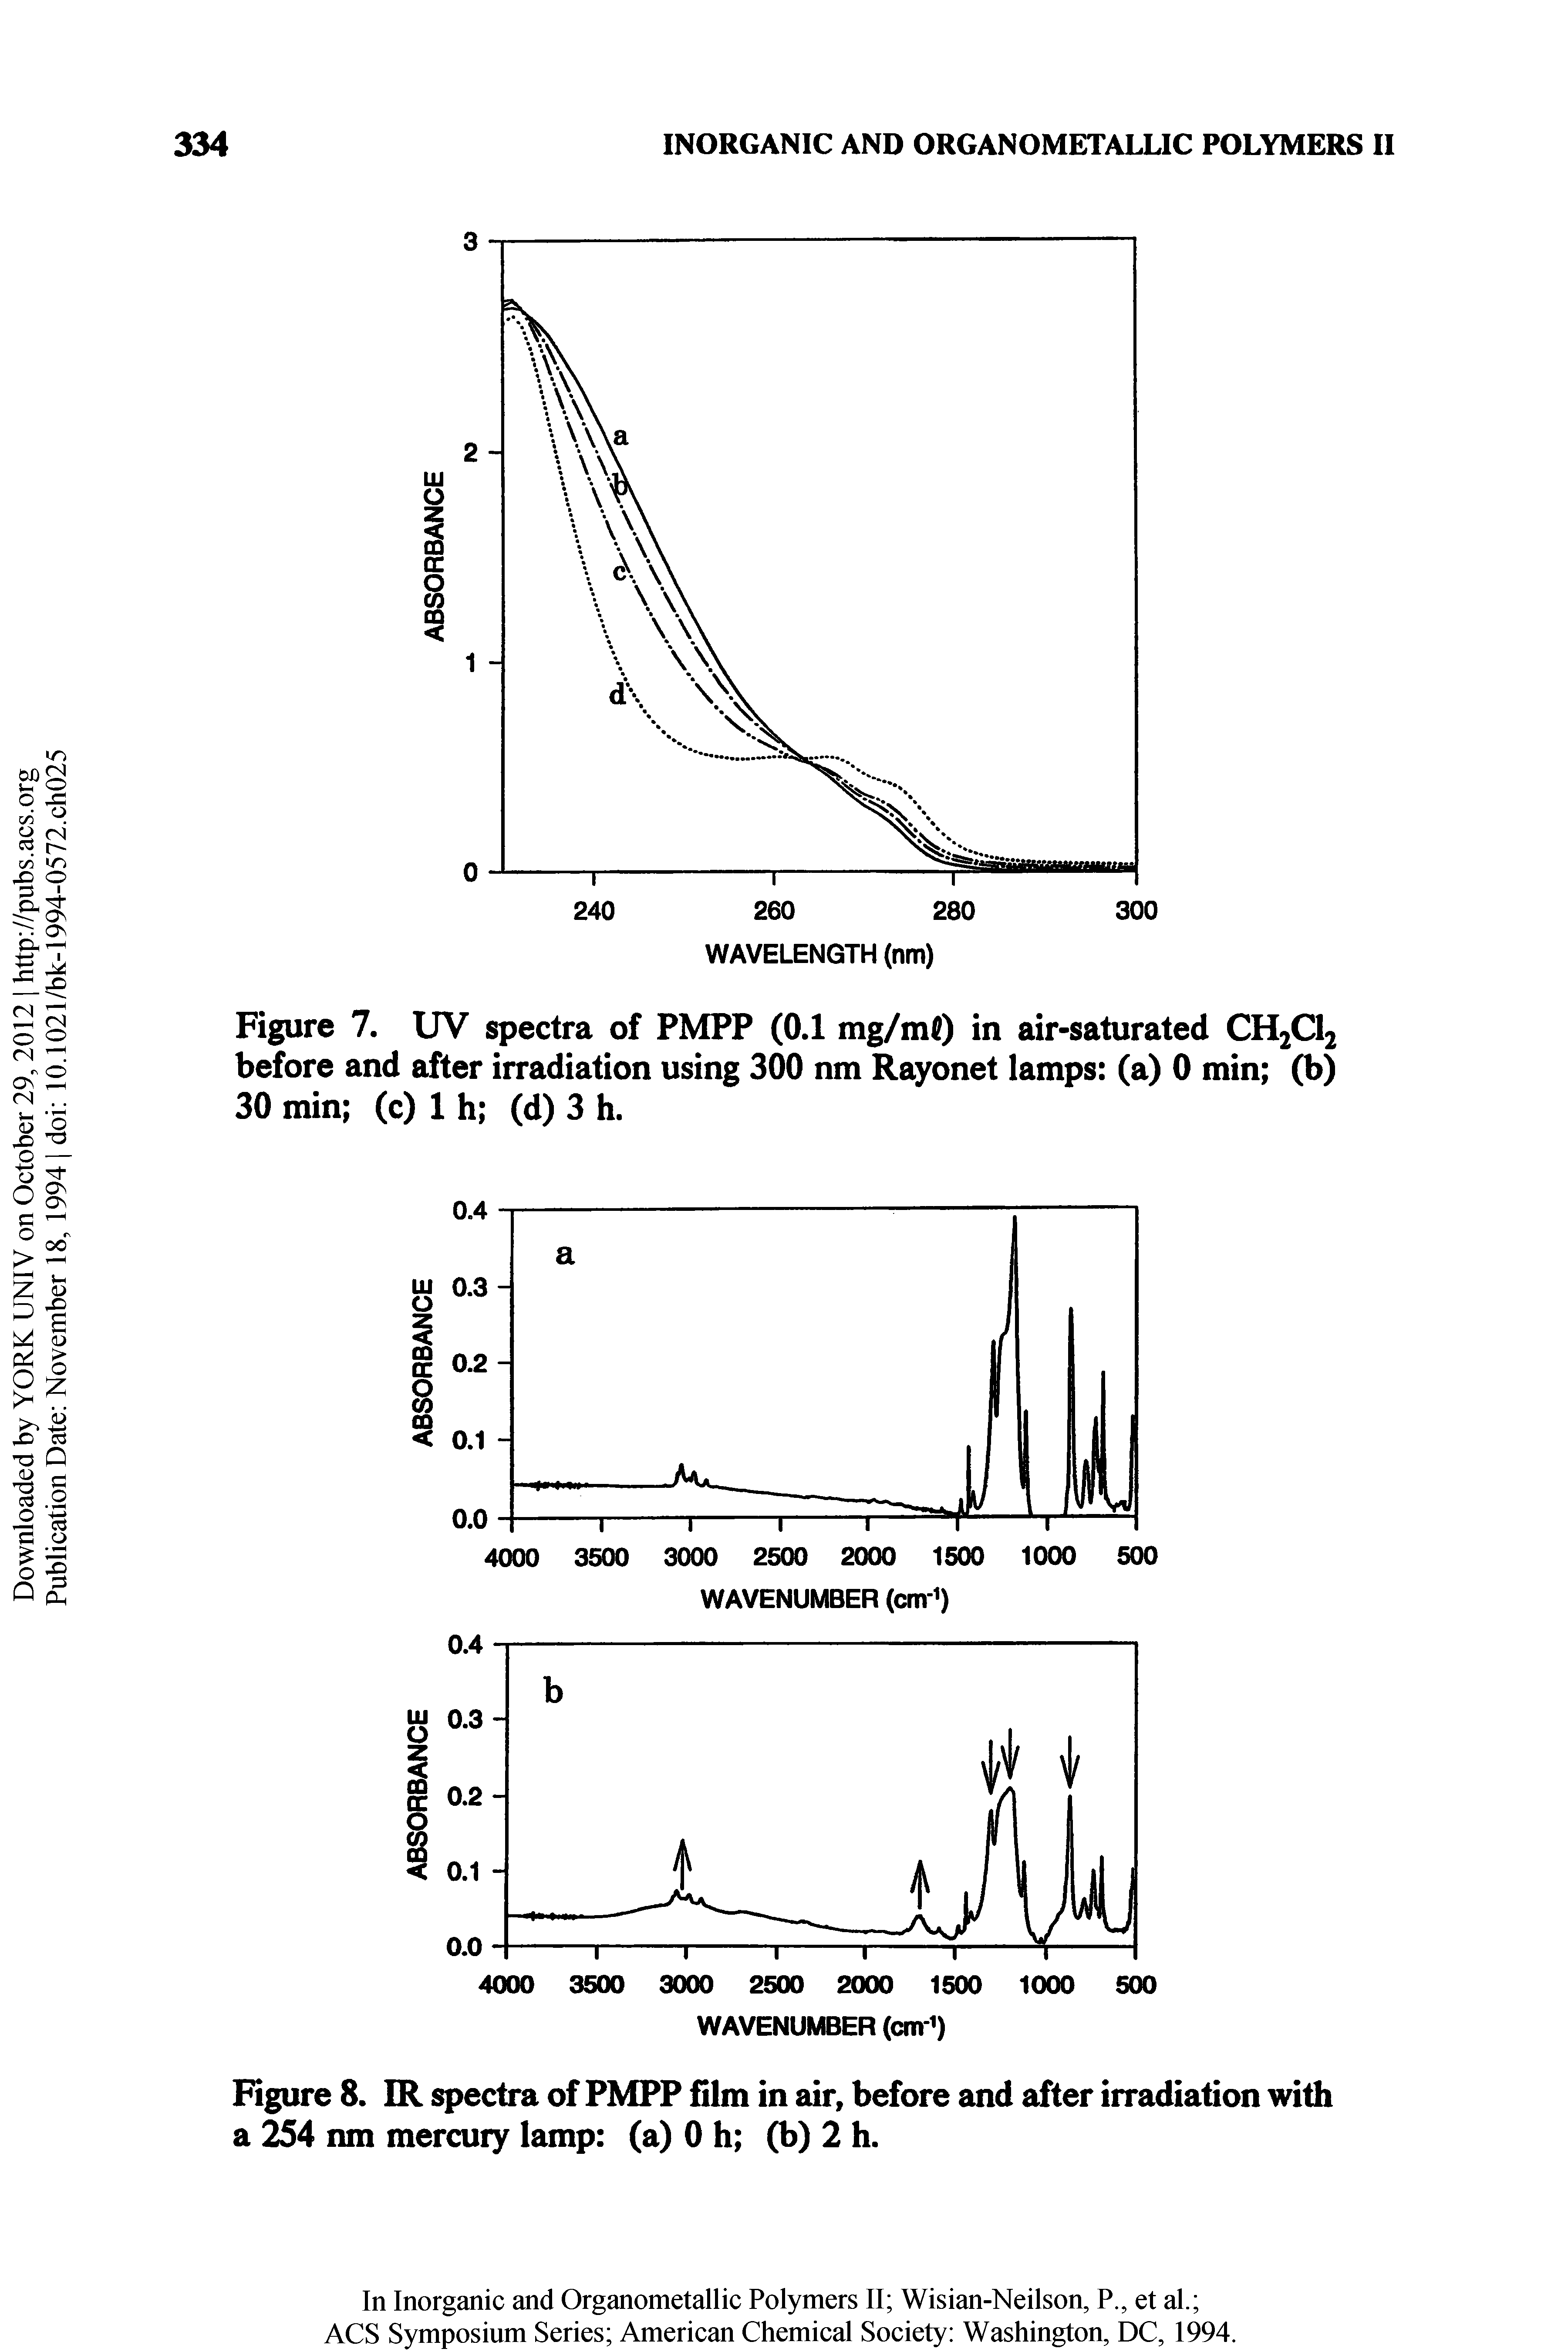 Figure 7. UV spectra of PMPP (0.1 mg/m() in air-saturated CH2Q2 before and after irradiation using 300 nm Rayonet lamps (a) 0 min (b) 30 min (c) 1 h (d) 3 h.